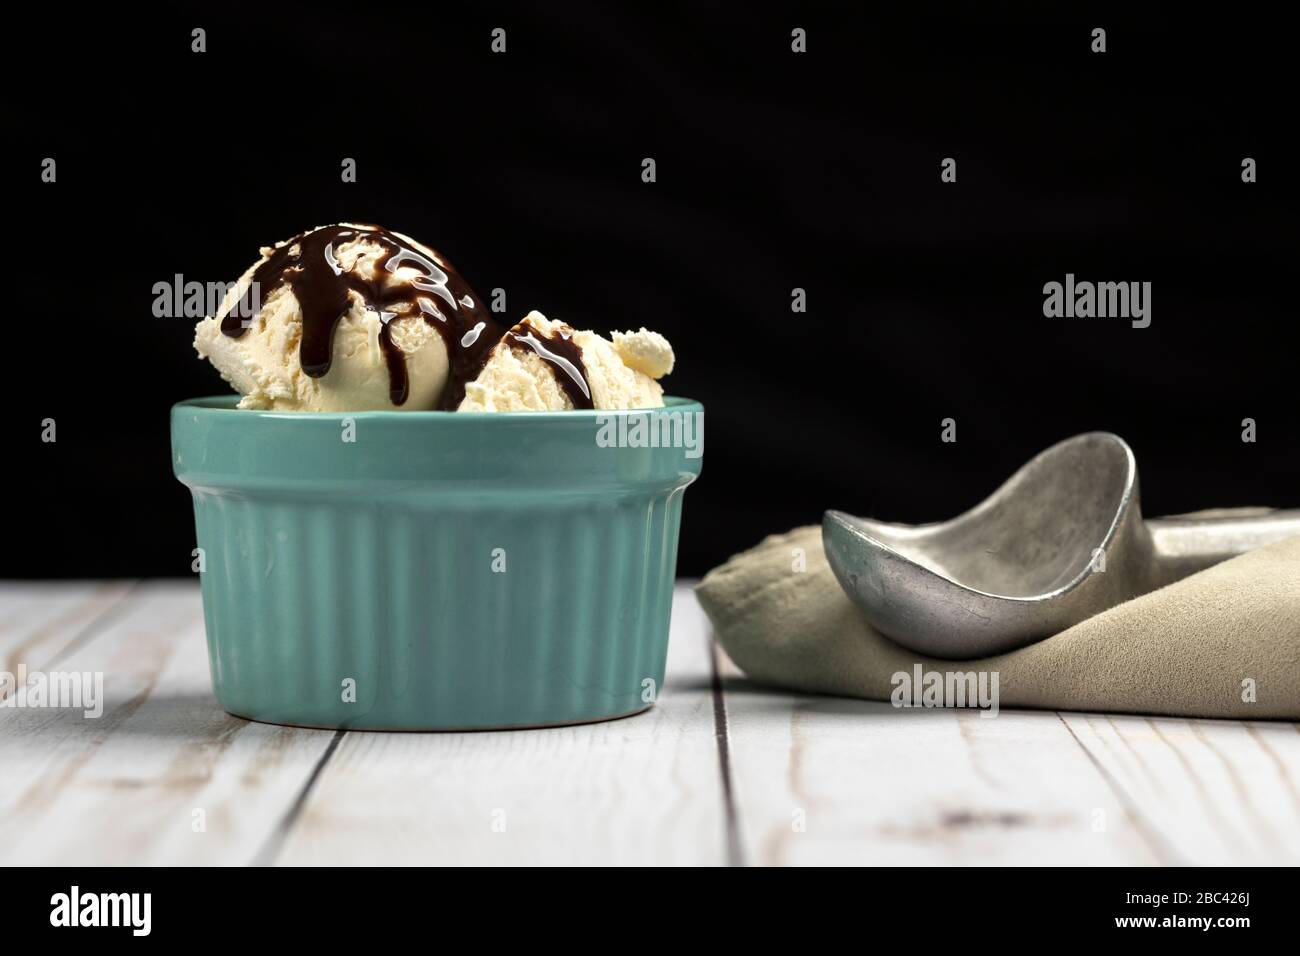 Scoops of vanilla ice cream in a bowl smothered with chocolate syrup. Stock Photo